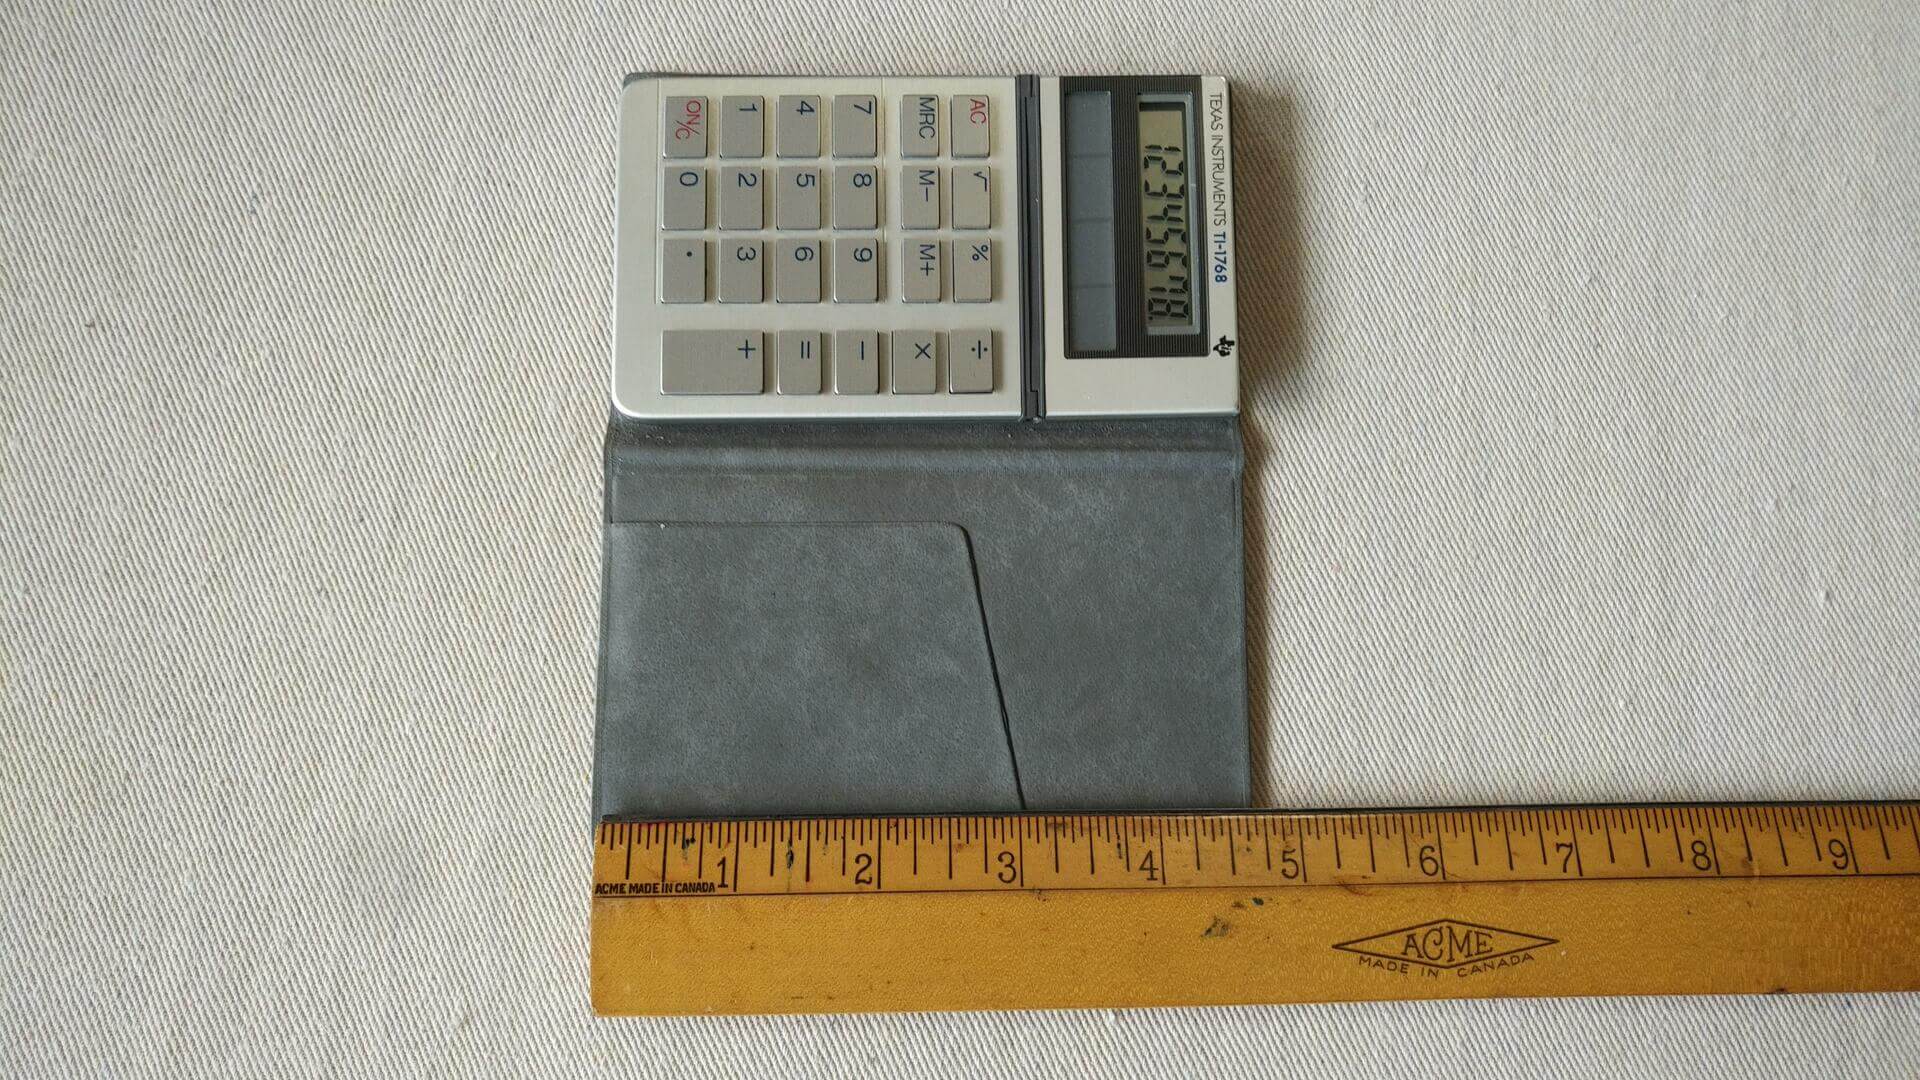 1980s Texas Instruments model TI-1768 mini pocket solar calculator with tilt display and nice embossed grey TI sleeve. Vintage collectible office equipment